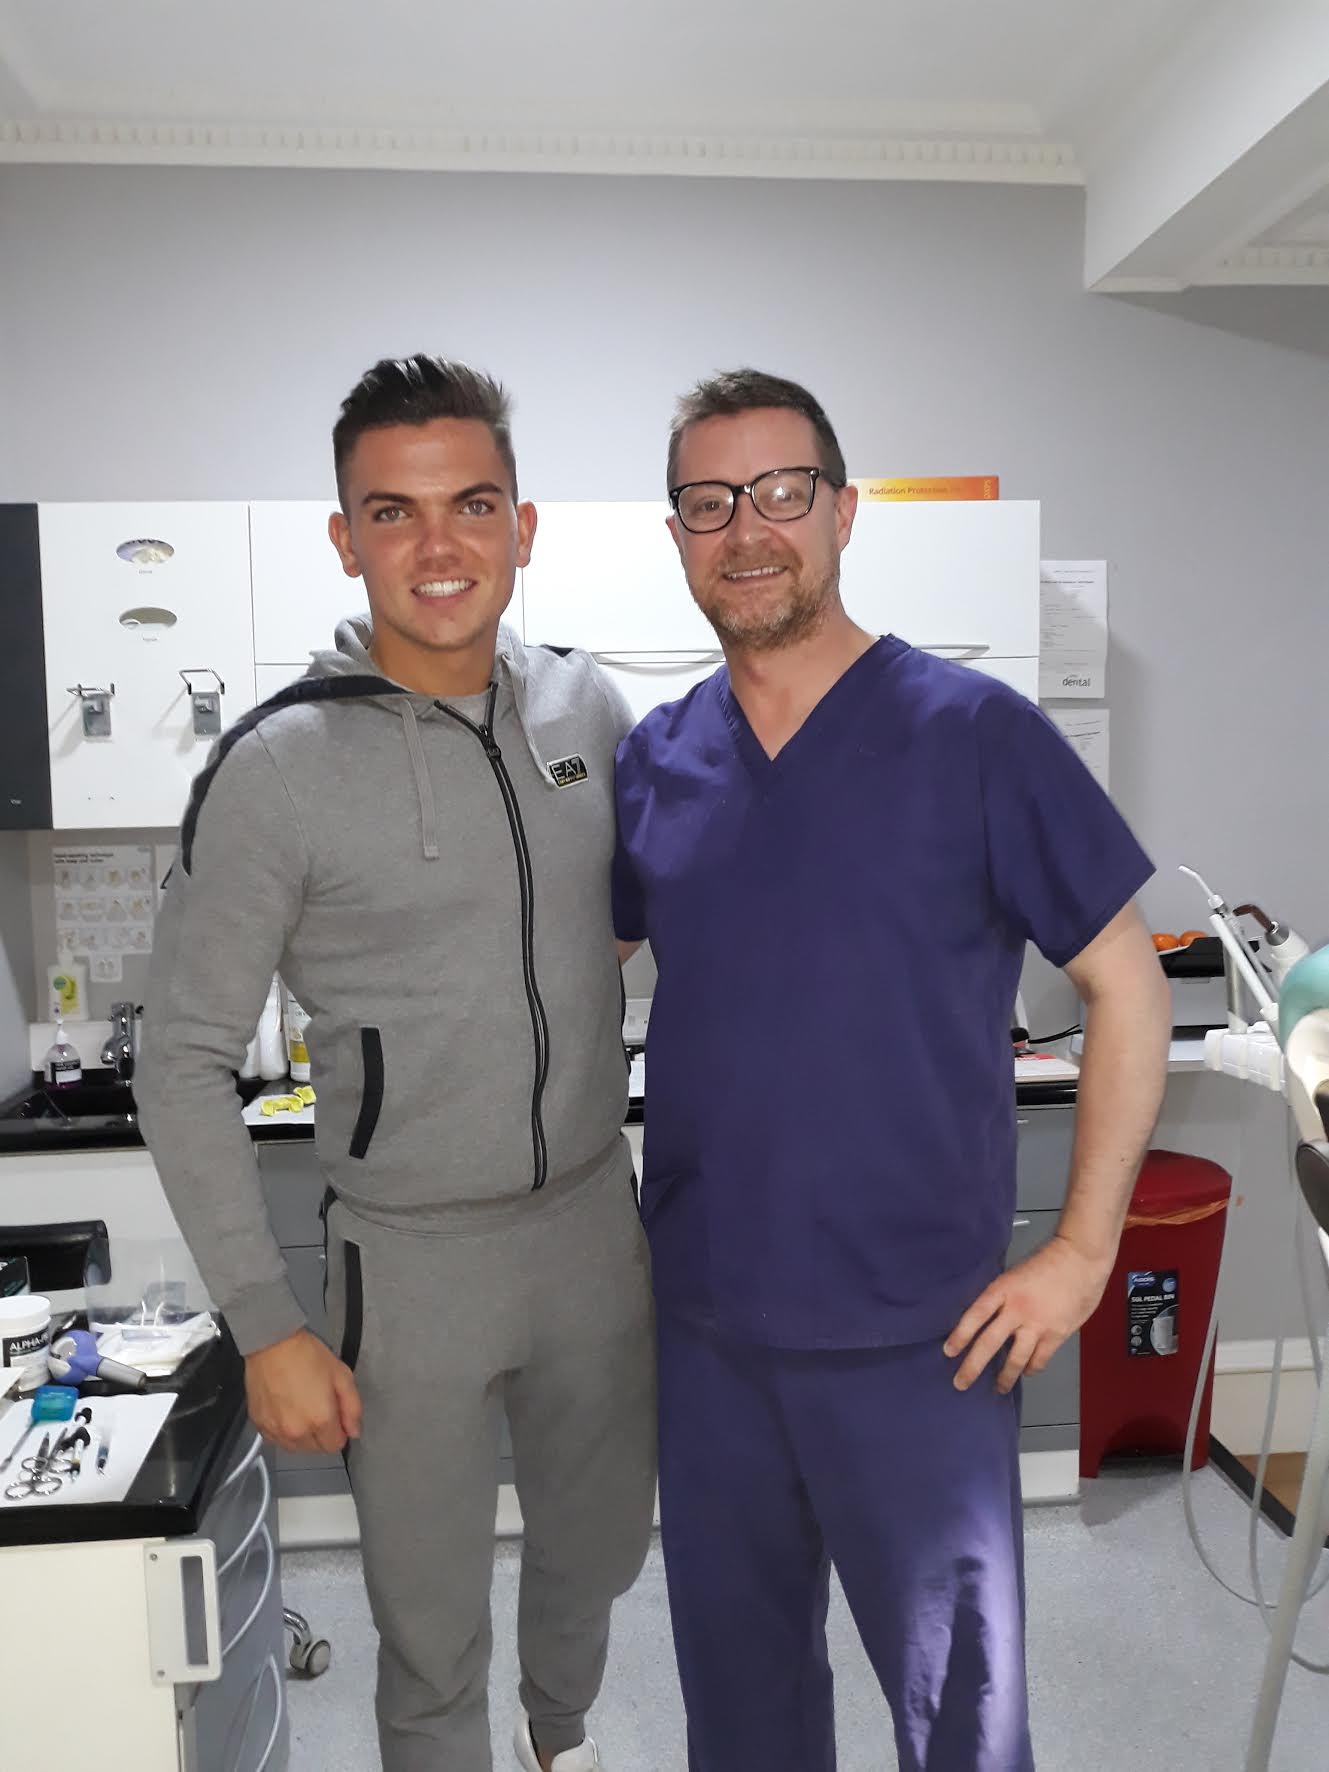 Sam Gowland pictured with Dr Mark Jones